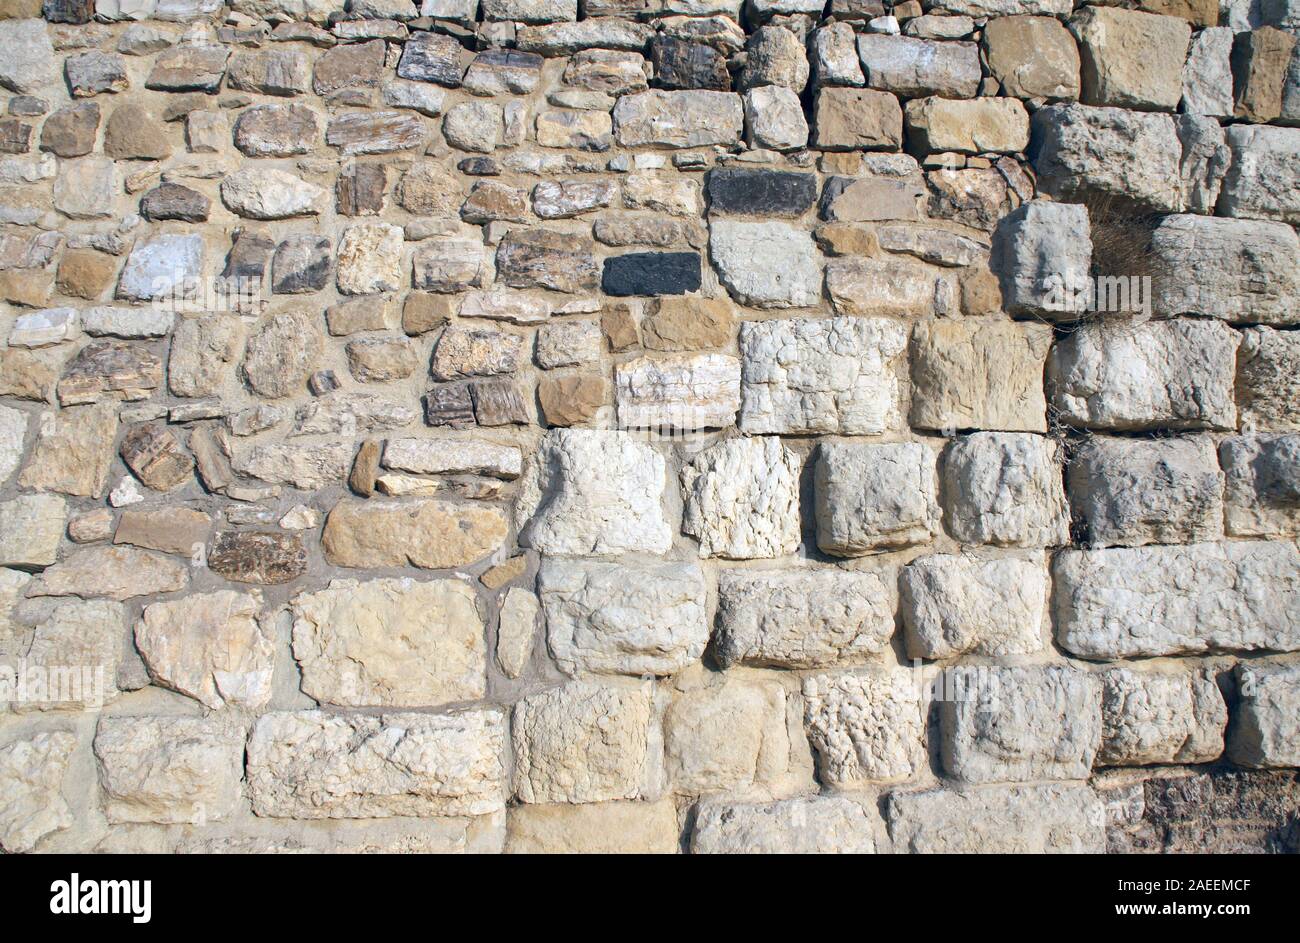 Ancient wall of stone blocks of different color and sizes Stock Photo